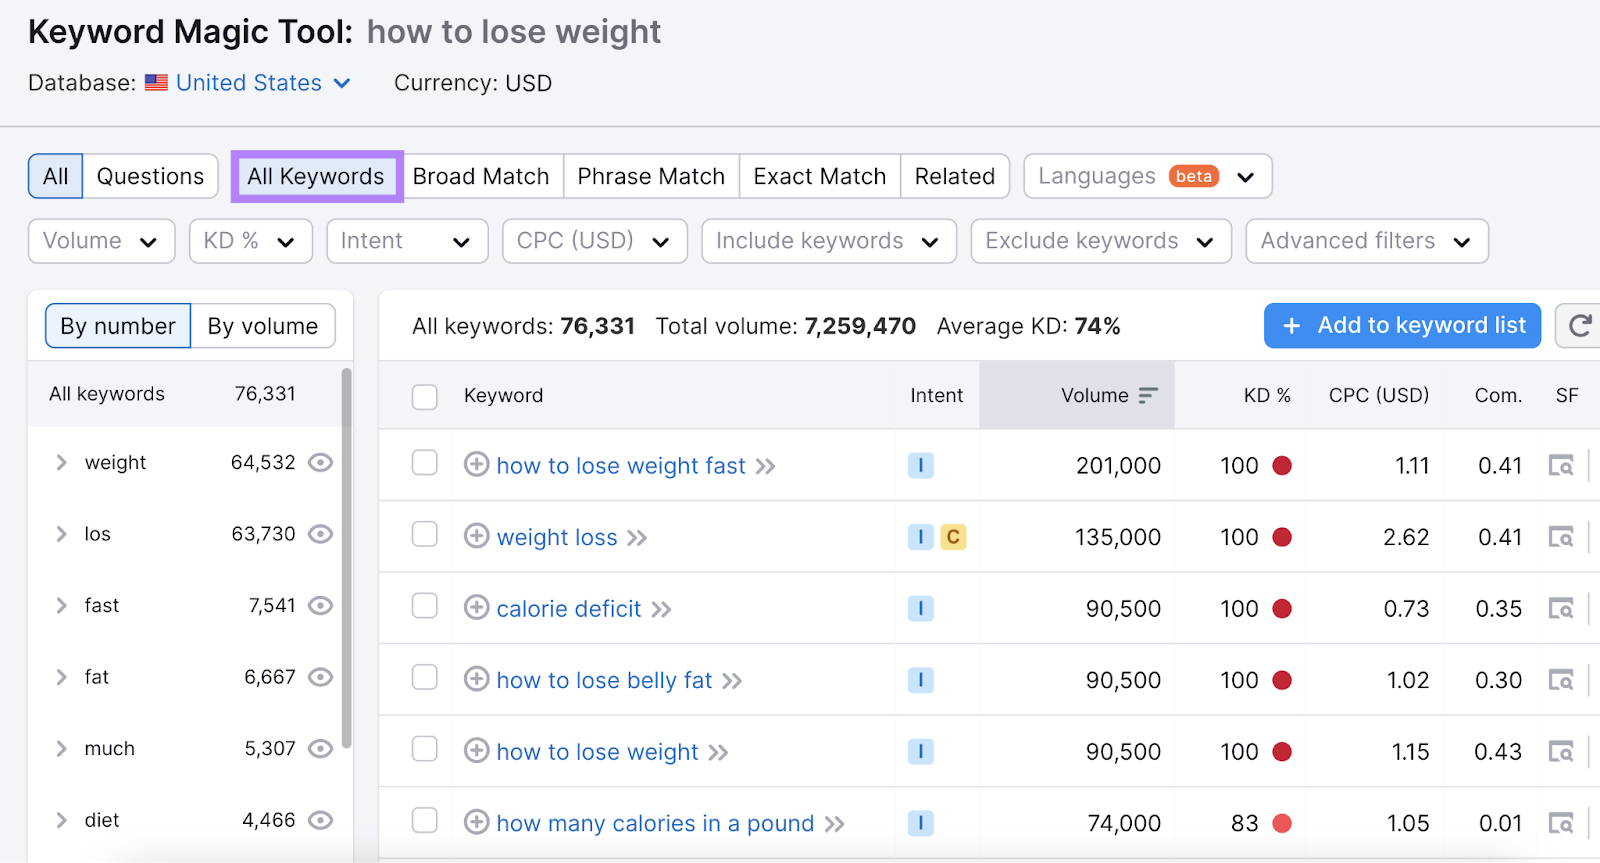 Keyword Magic Tool results for "how to suffer  weight"